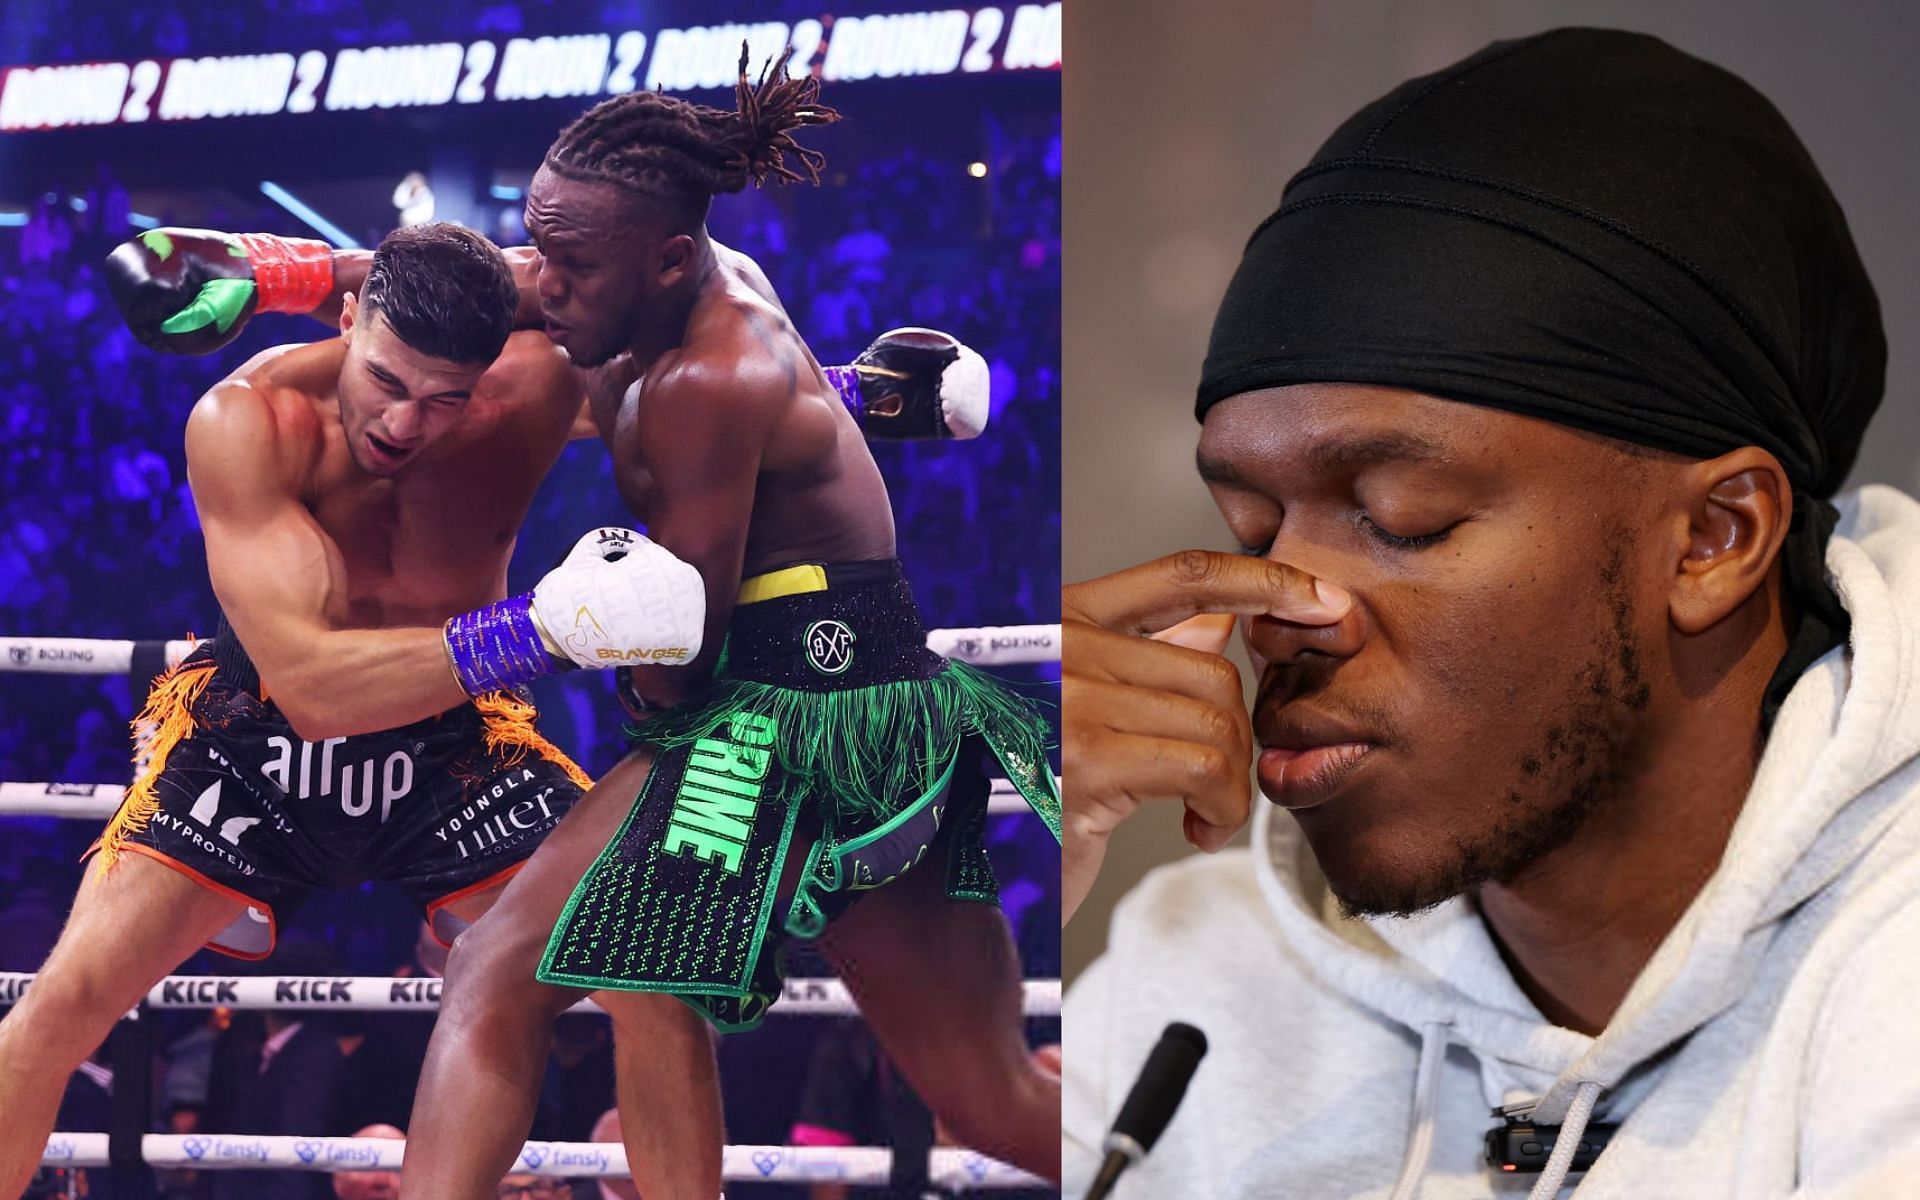 Tommy Fury vs. KSI (left) and KSI (right) [Images Courtesy: @GettyImages]